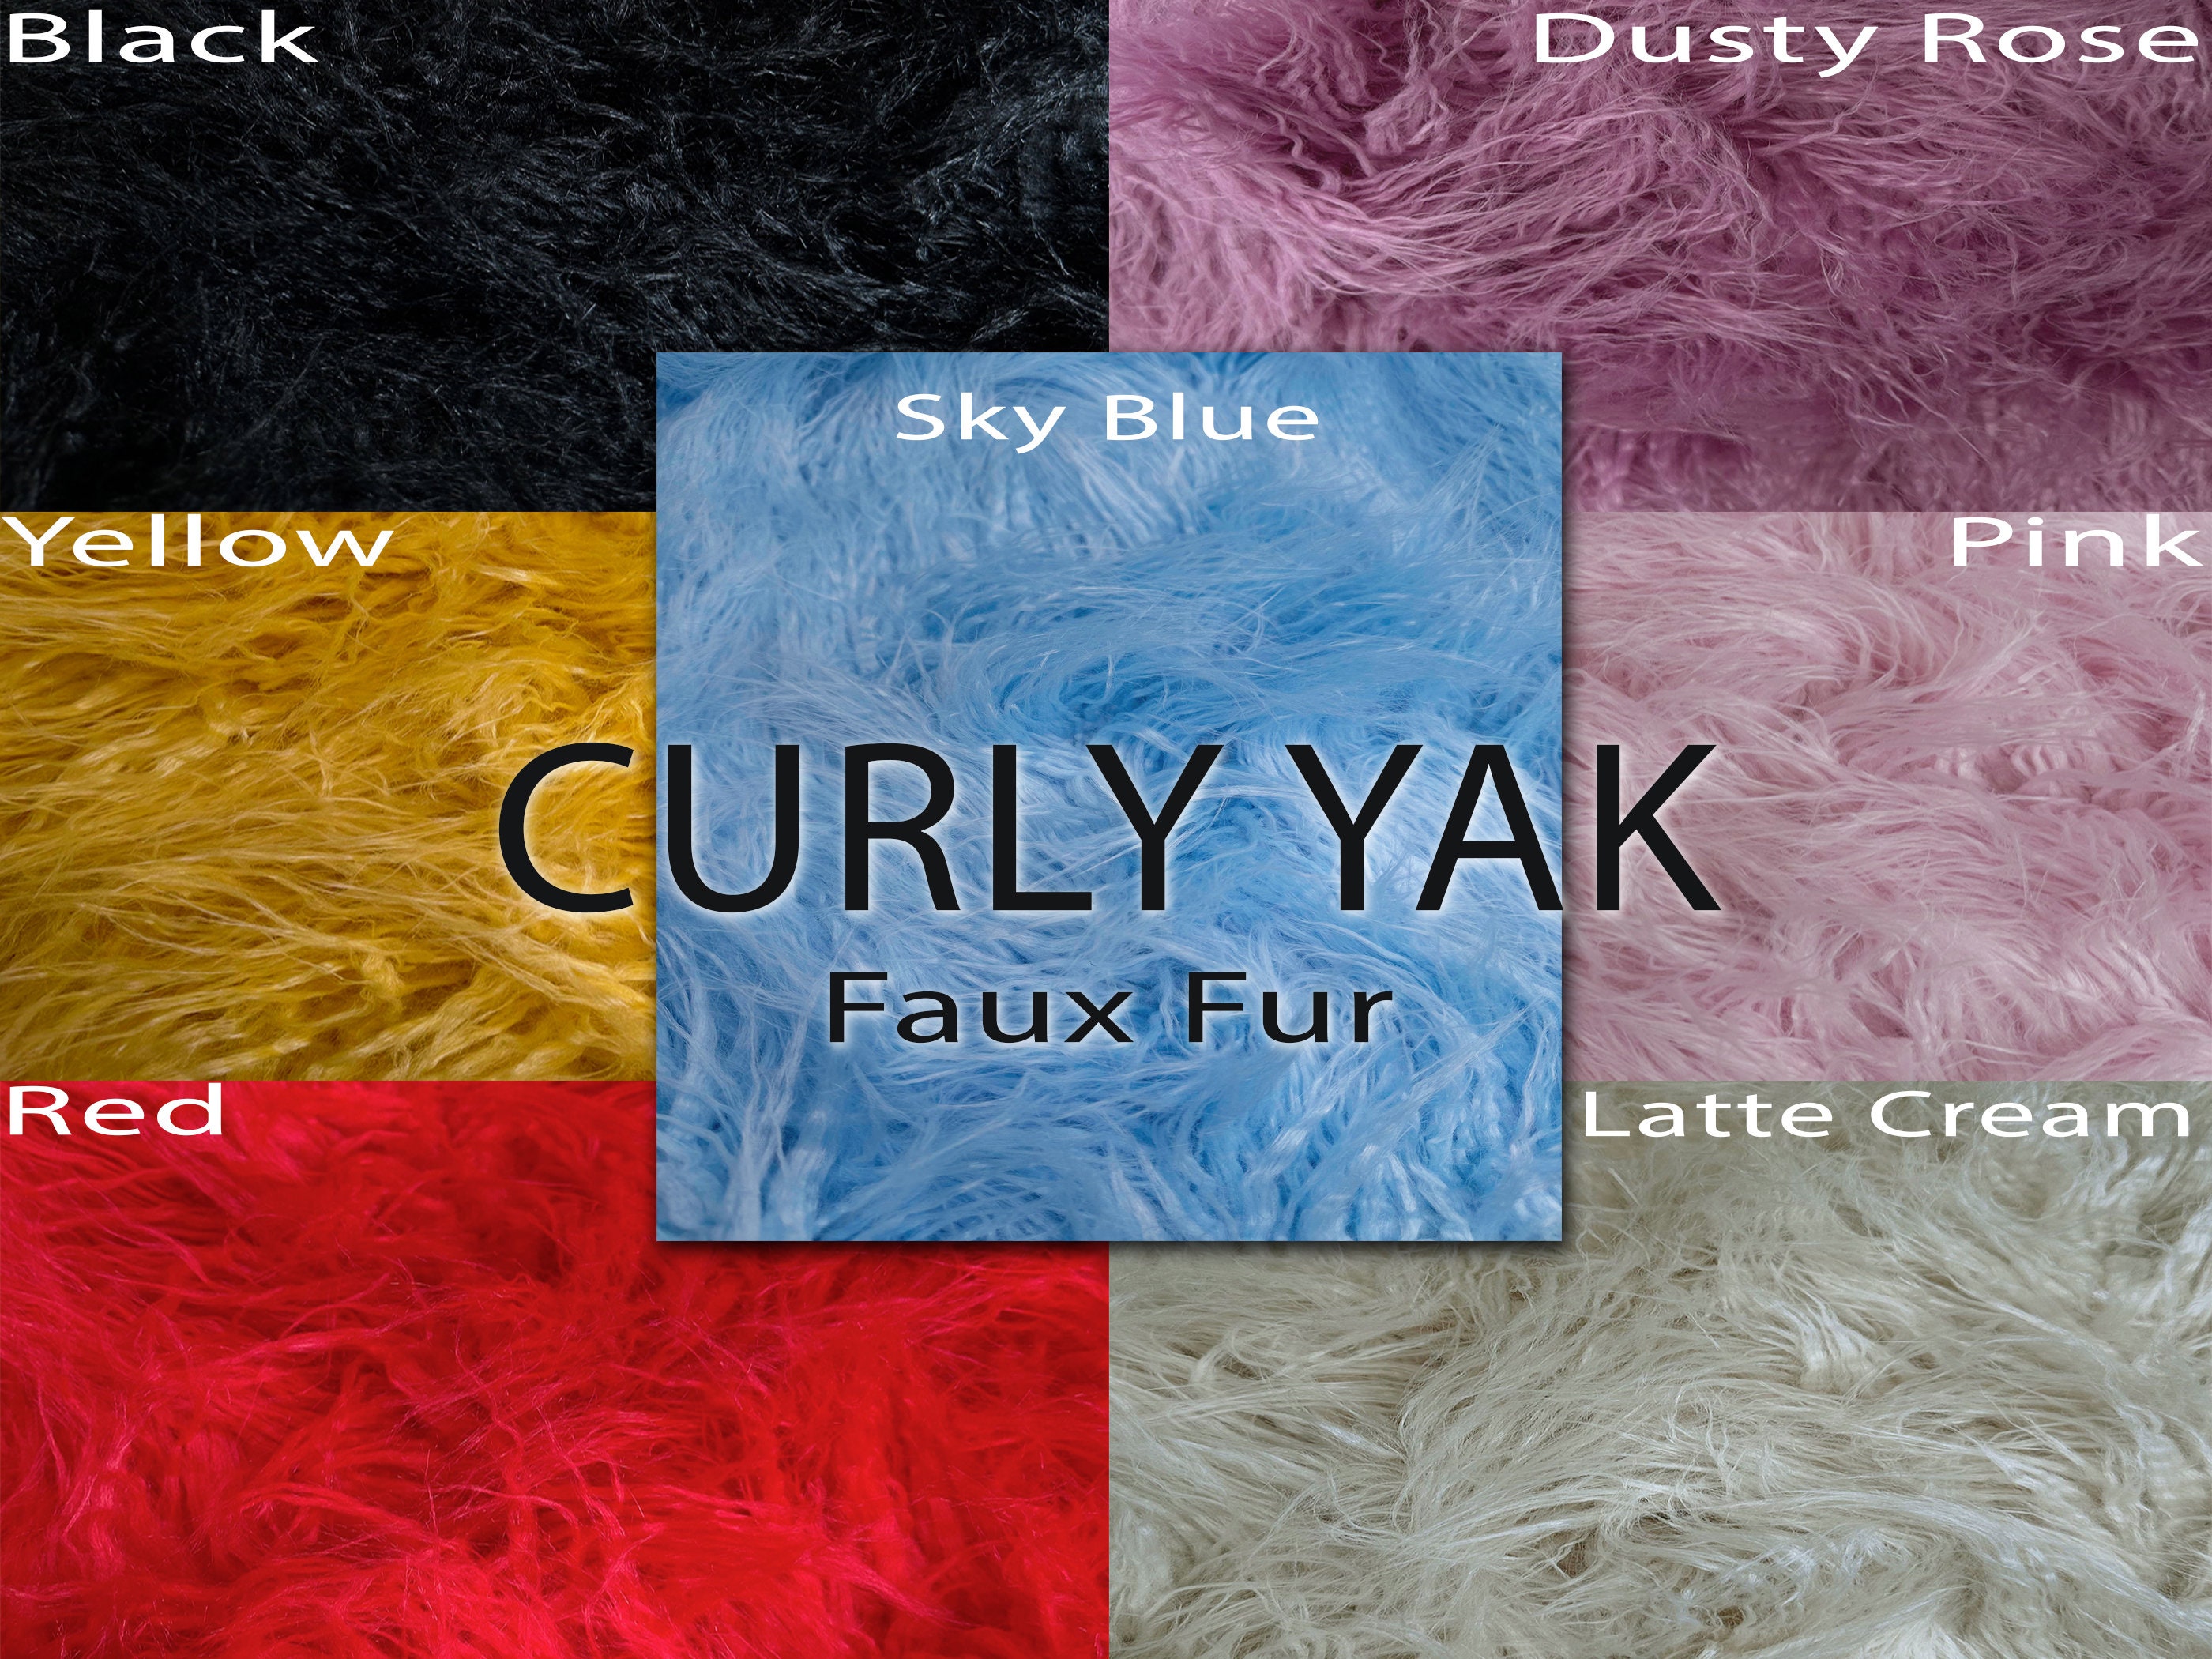 Lion Brand Yarn Go for Faux Thick and Quick Husky Faux Fur Jumbo Polyester  Grey Yarn 3 Pack